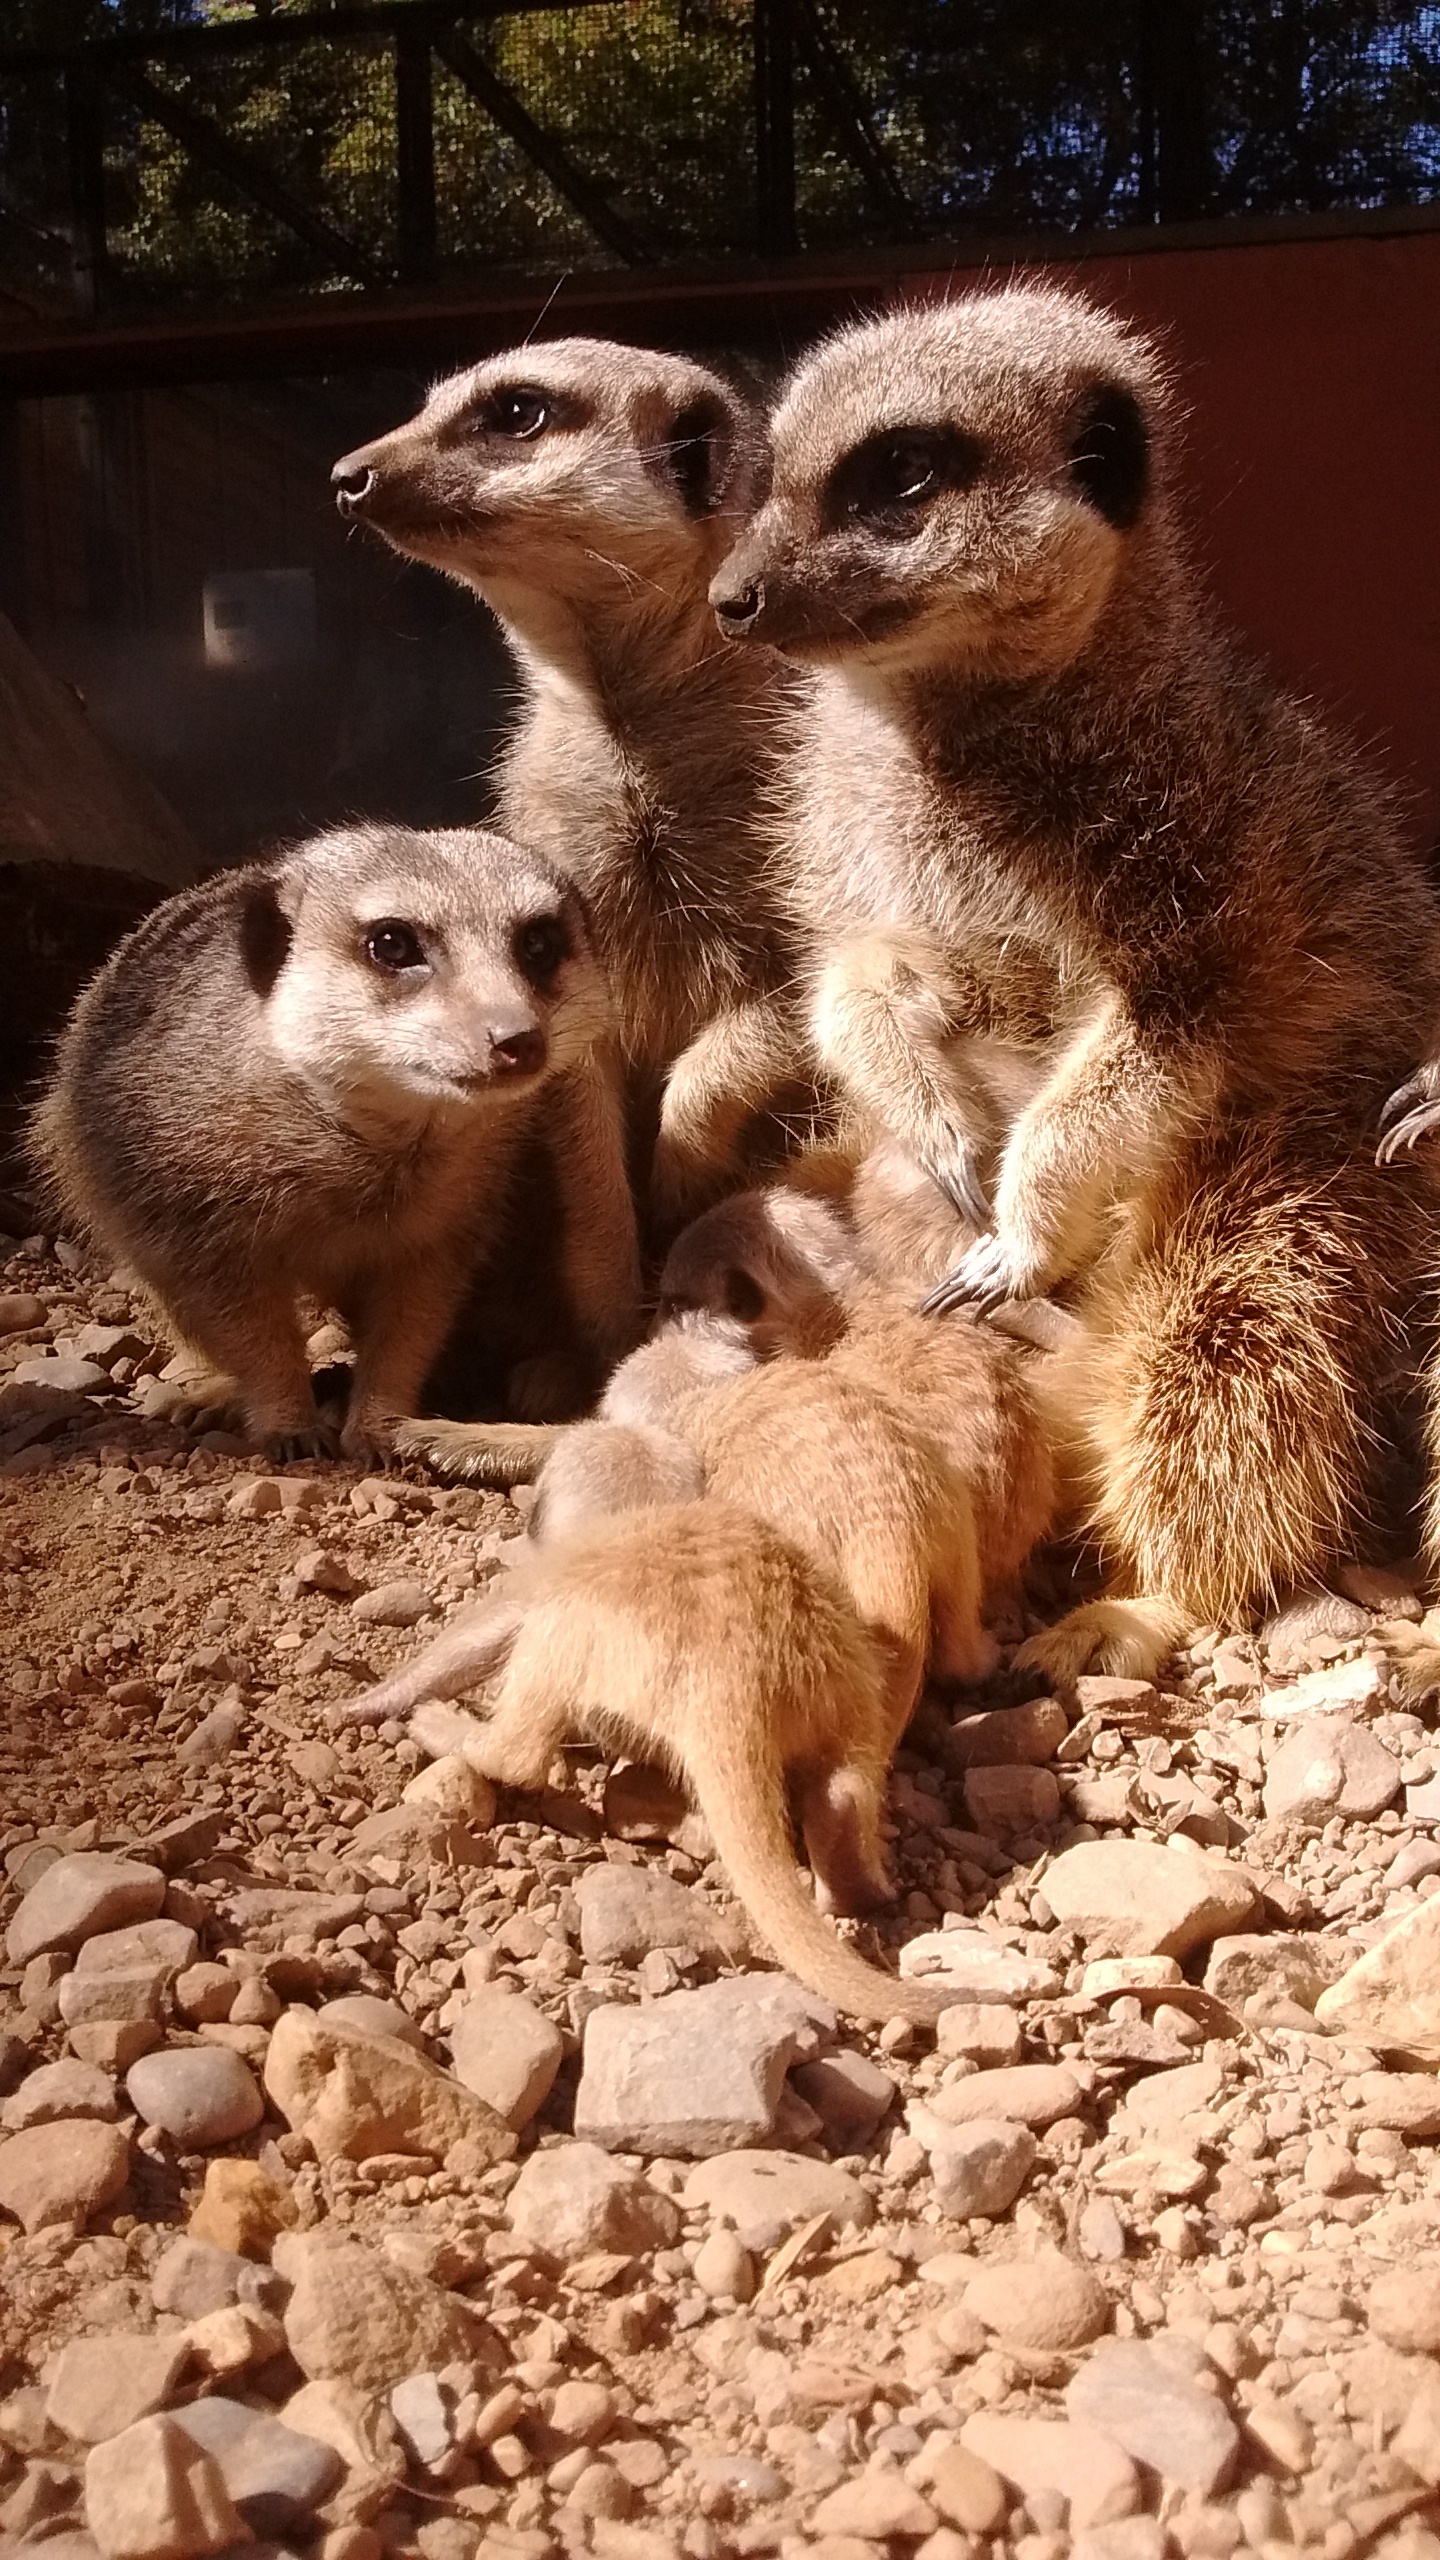 The race is on to complete the meerkat’s home